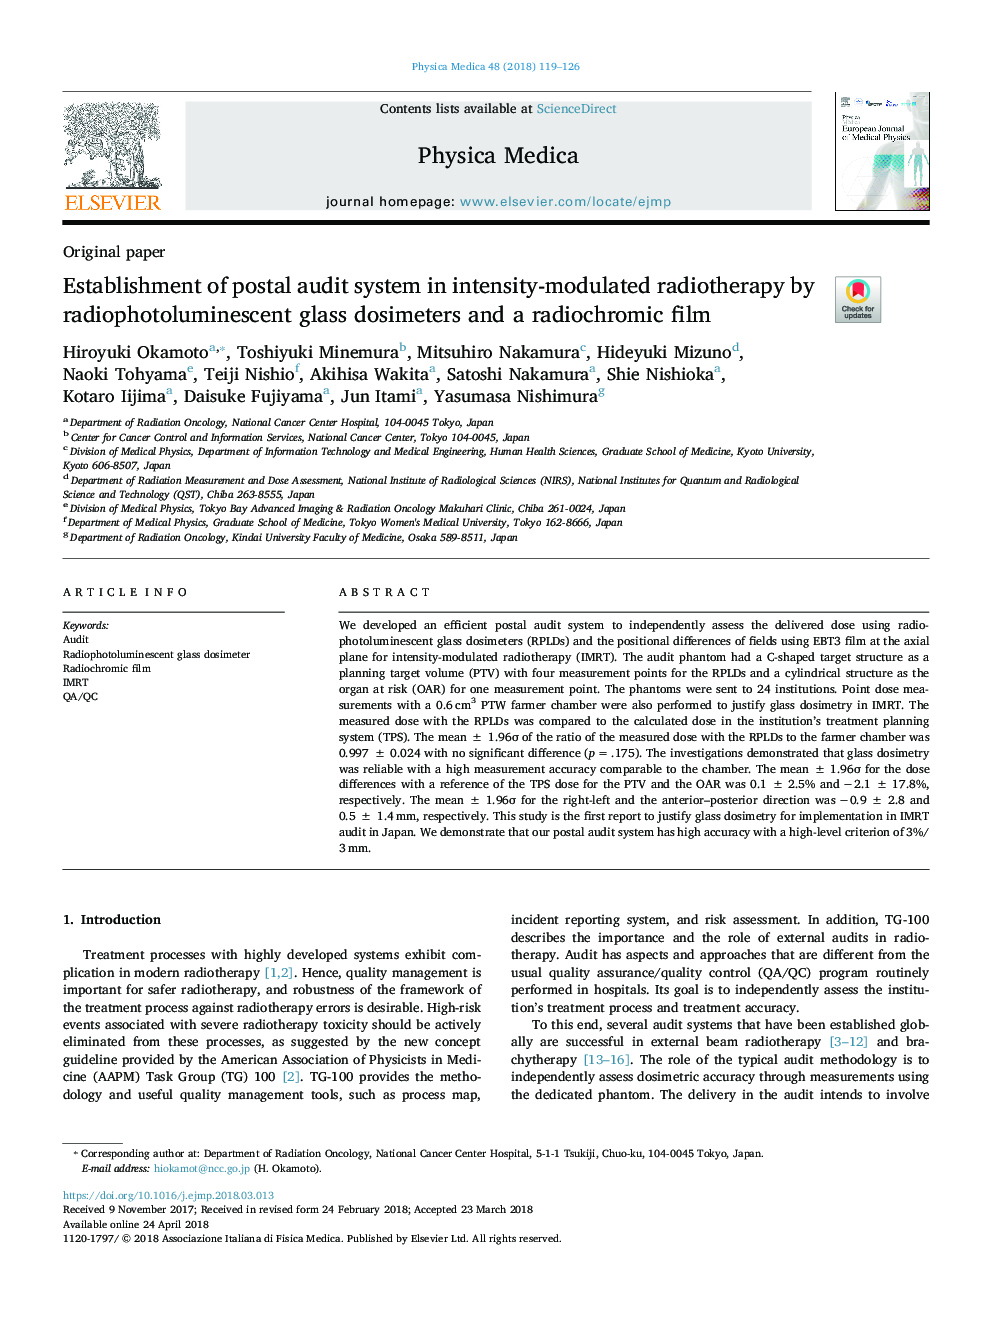 Establishment of postal audit system in intensity-modulated radiotherapy by radiophotoluminescent glass dosimeters and a radiochromic film